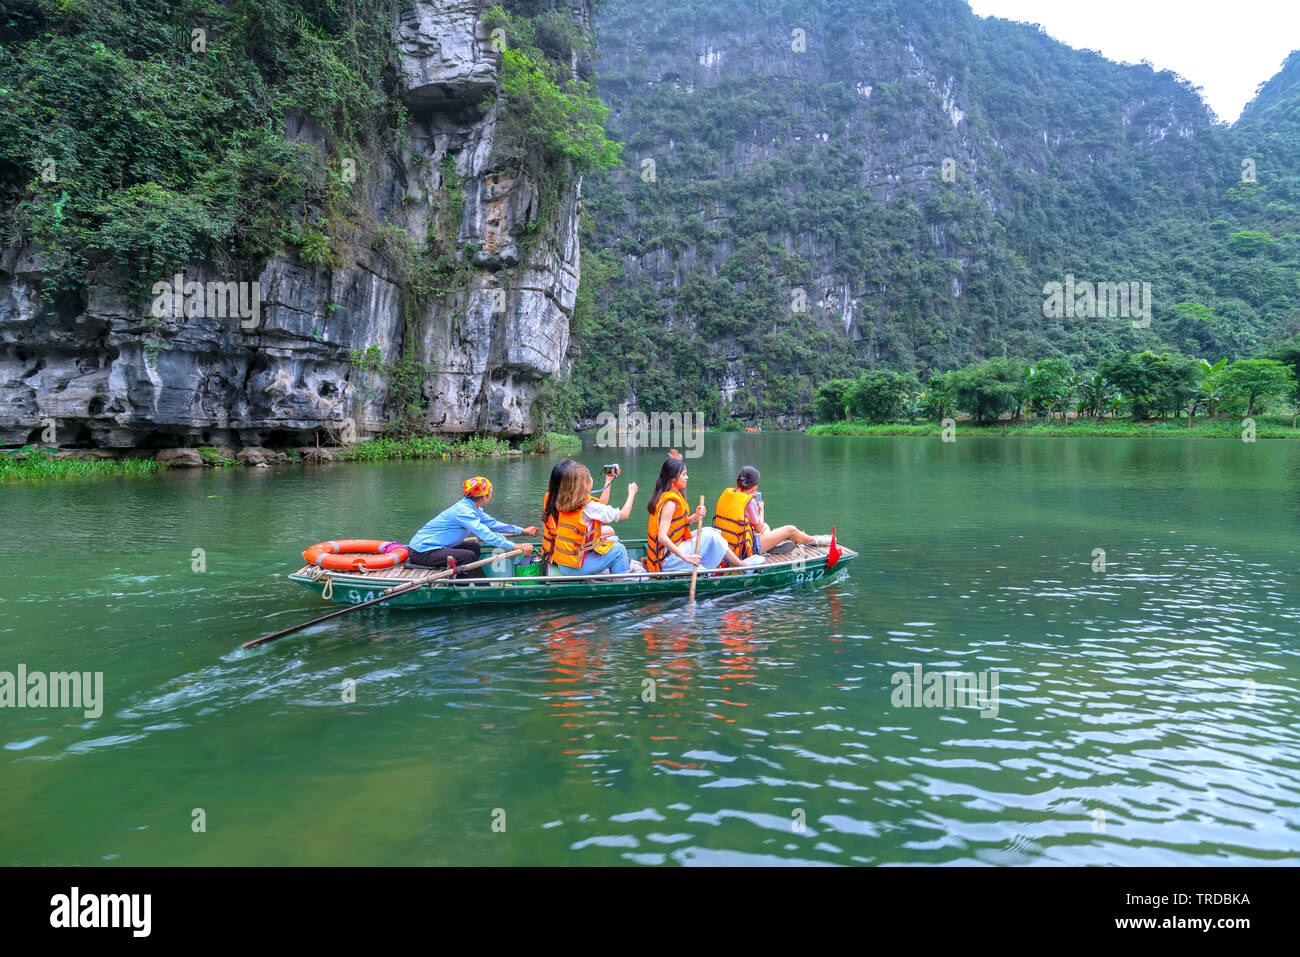 Tourists leaving marina travel to visit Ecotourism the natural landscape in small boat along the river Stock Photo